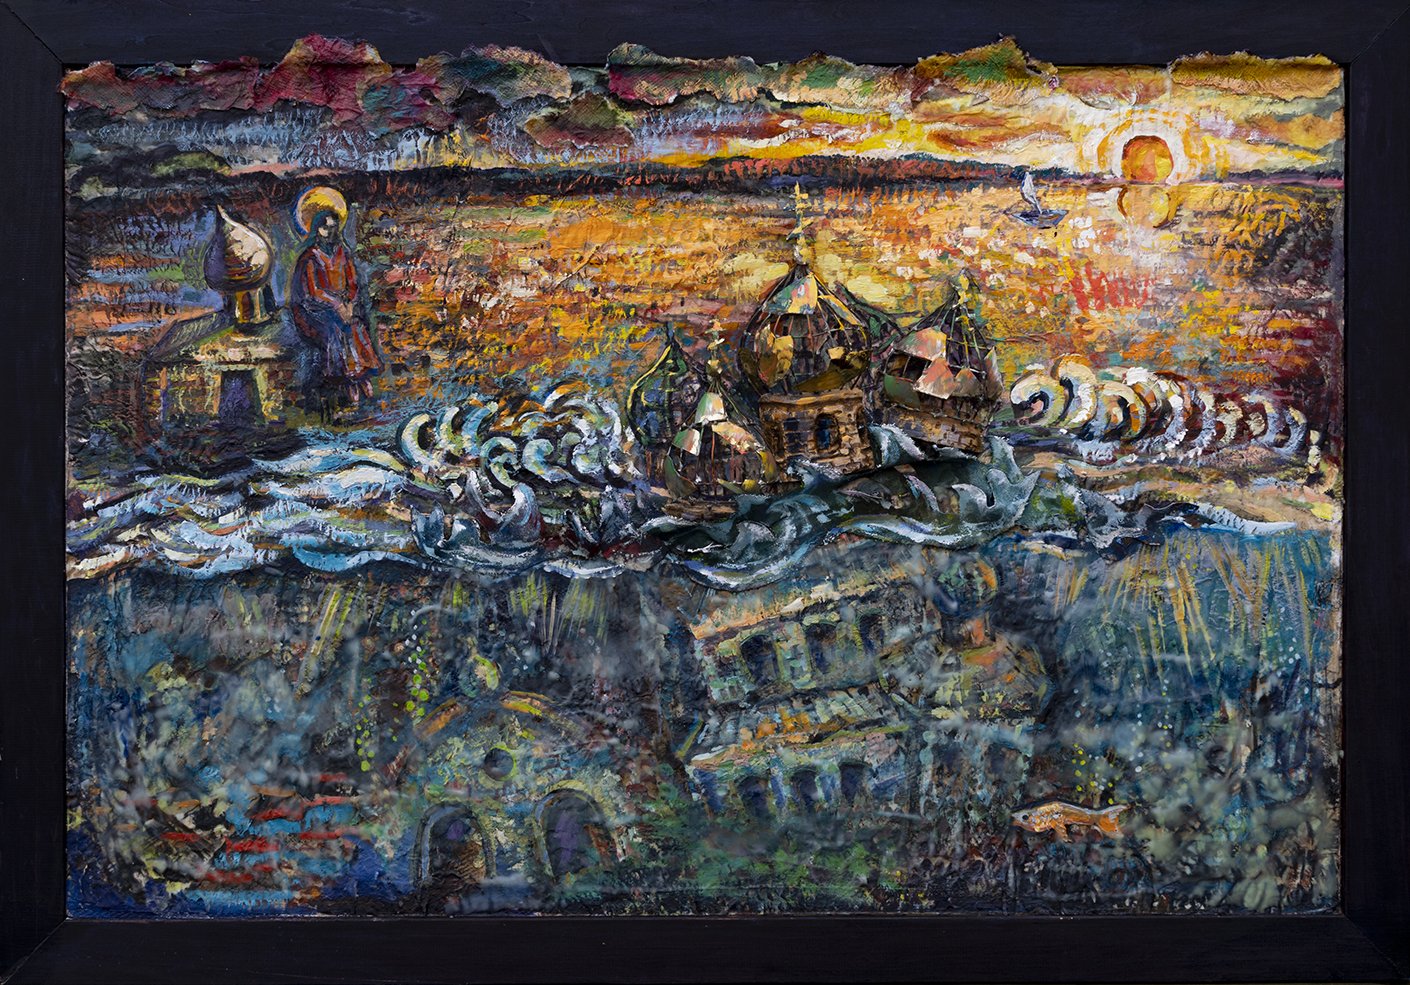    Submerged    mix media (domes by Viktor Krylov), 32in x 46.5in 